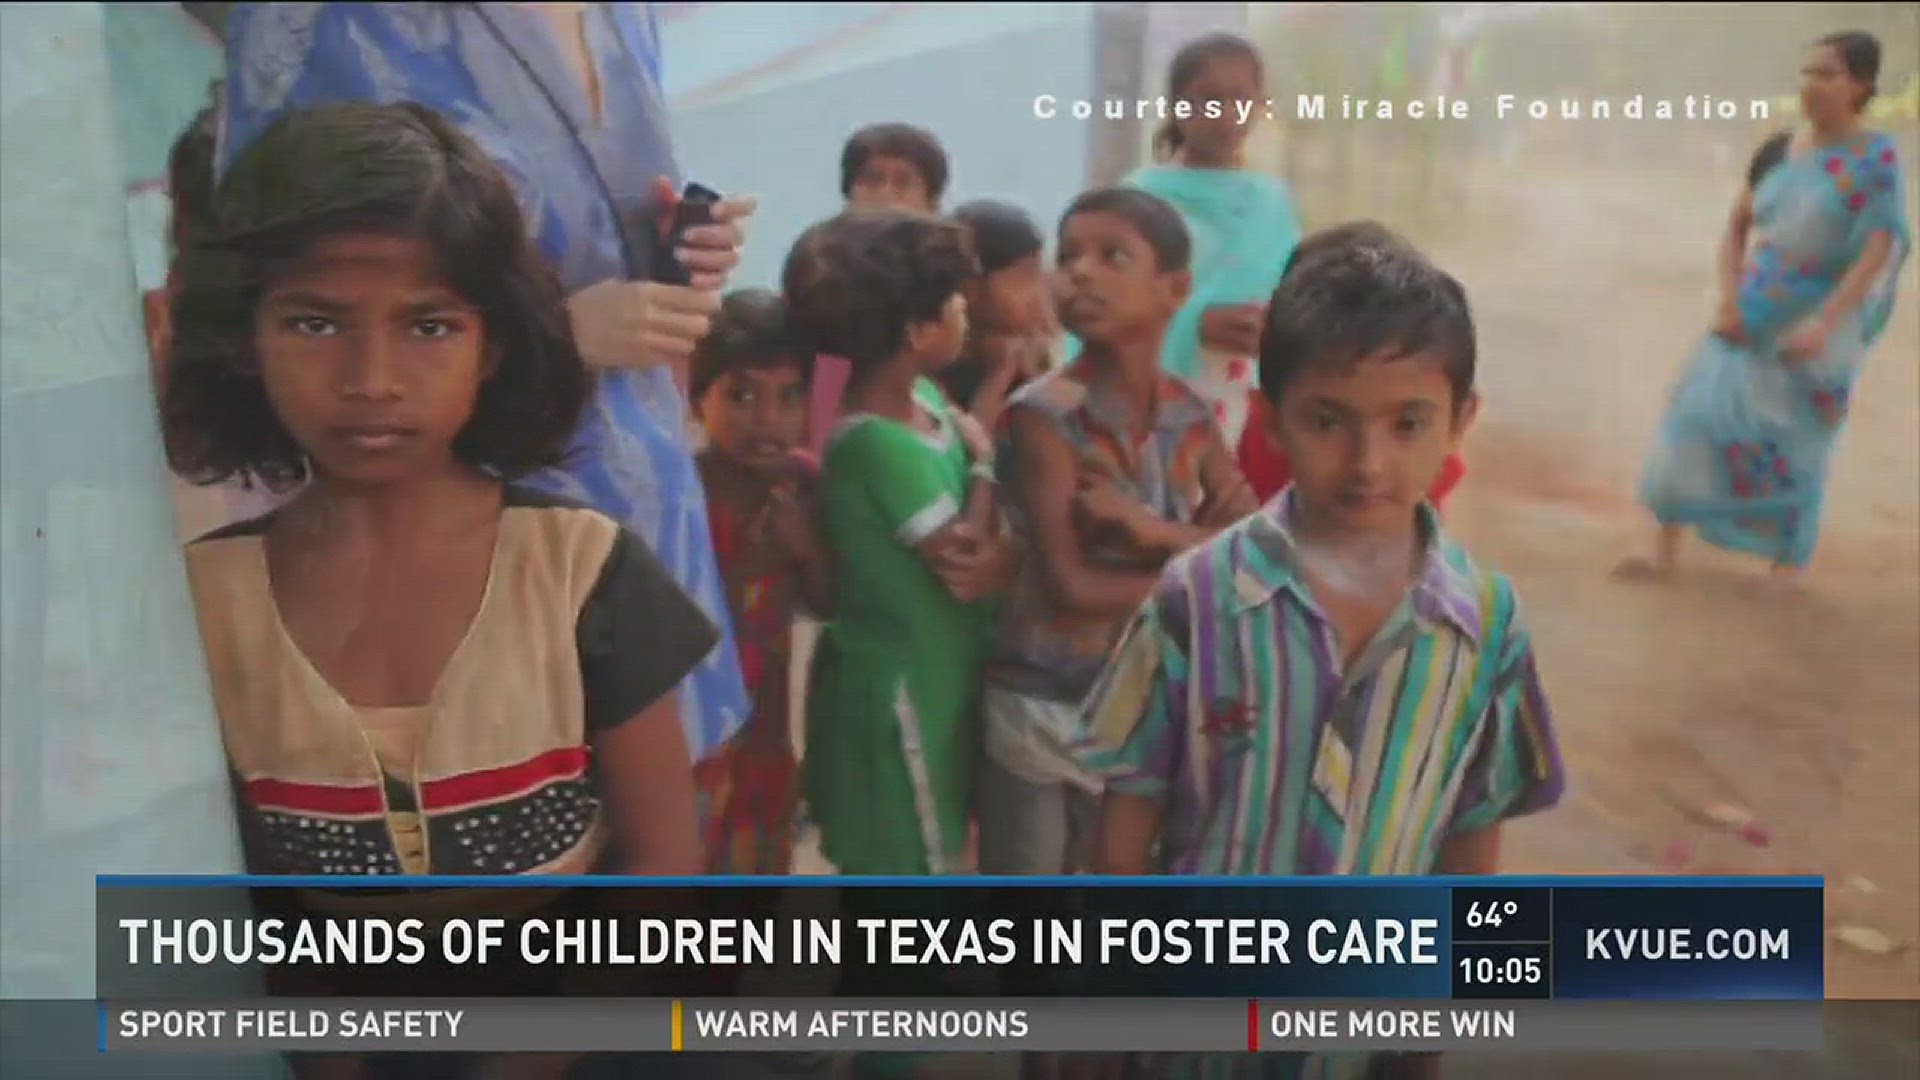 Thousands of children in Texas foster care